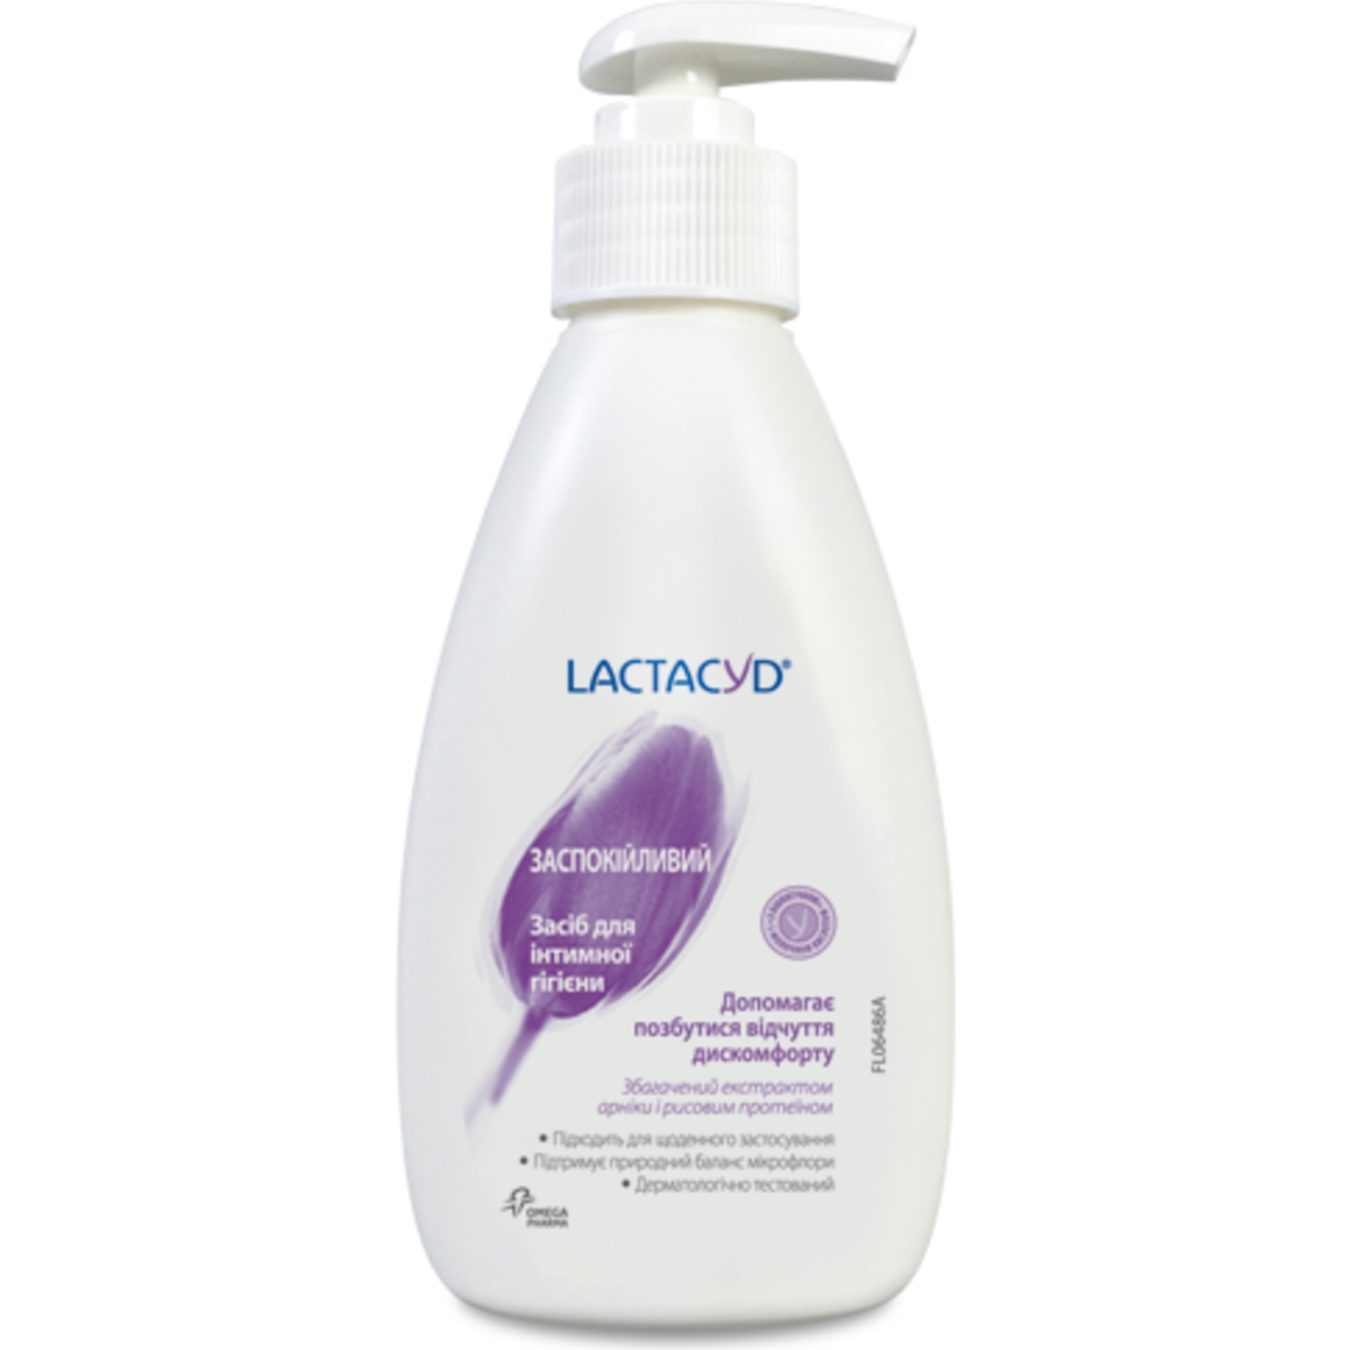 Lactacyd Soothing With Dispenser For Intimate Hygiene Gel 200ml